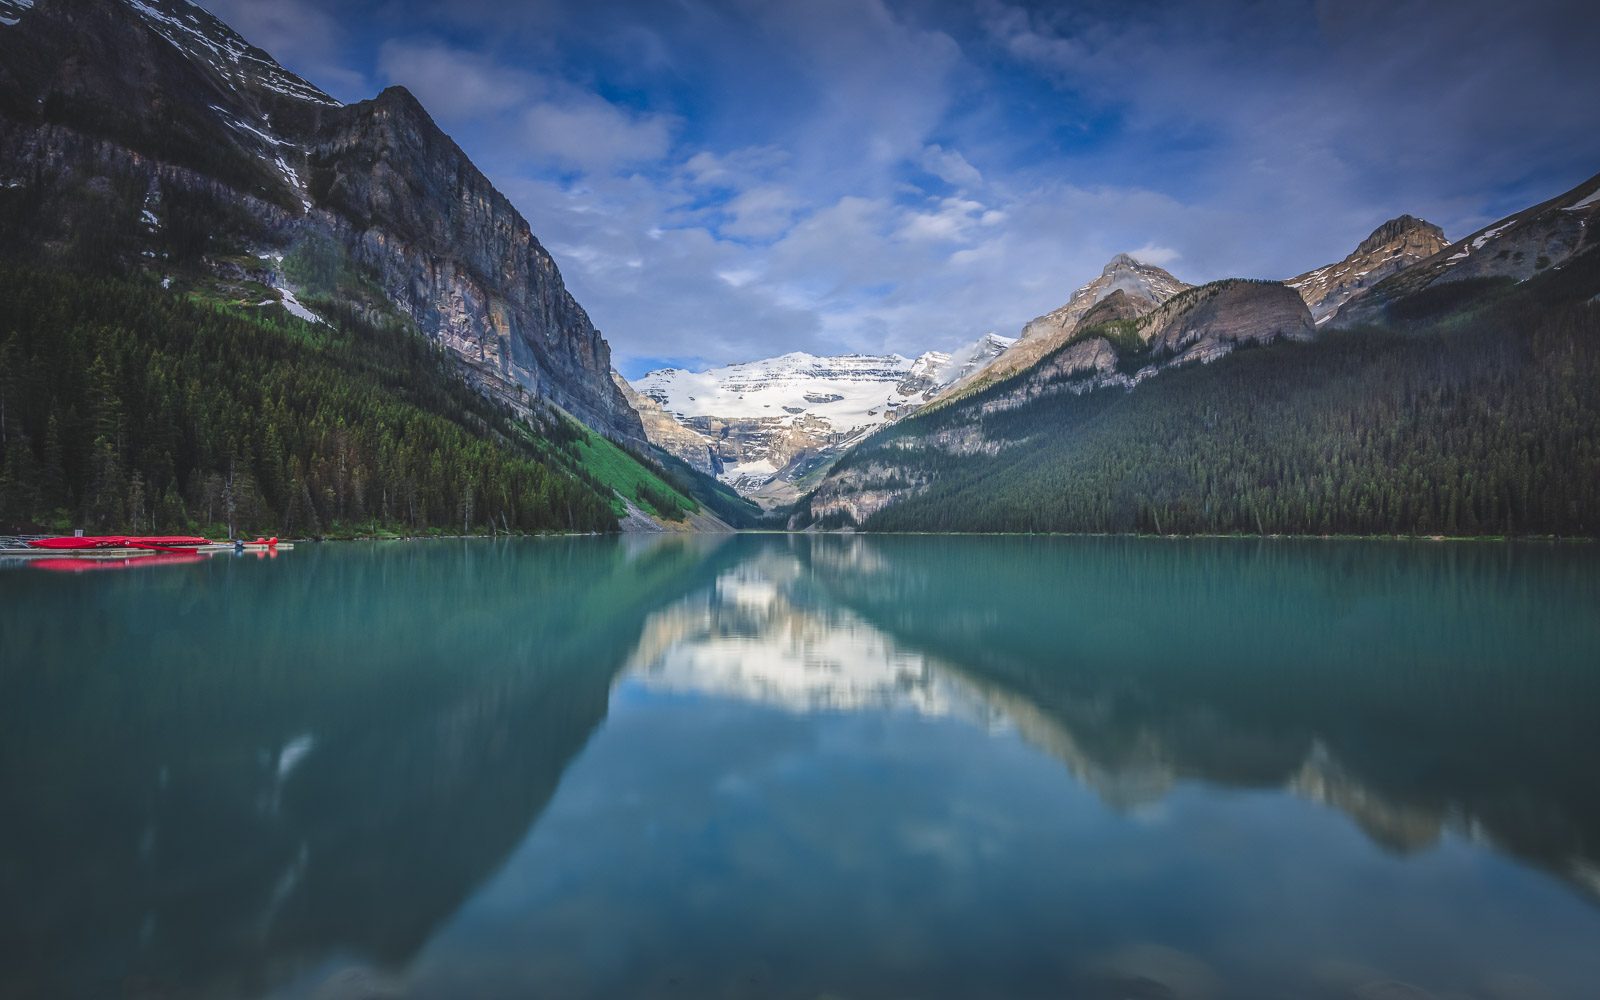 The Best Things to do in Banff, Alberta for 2022